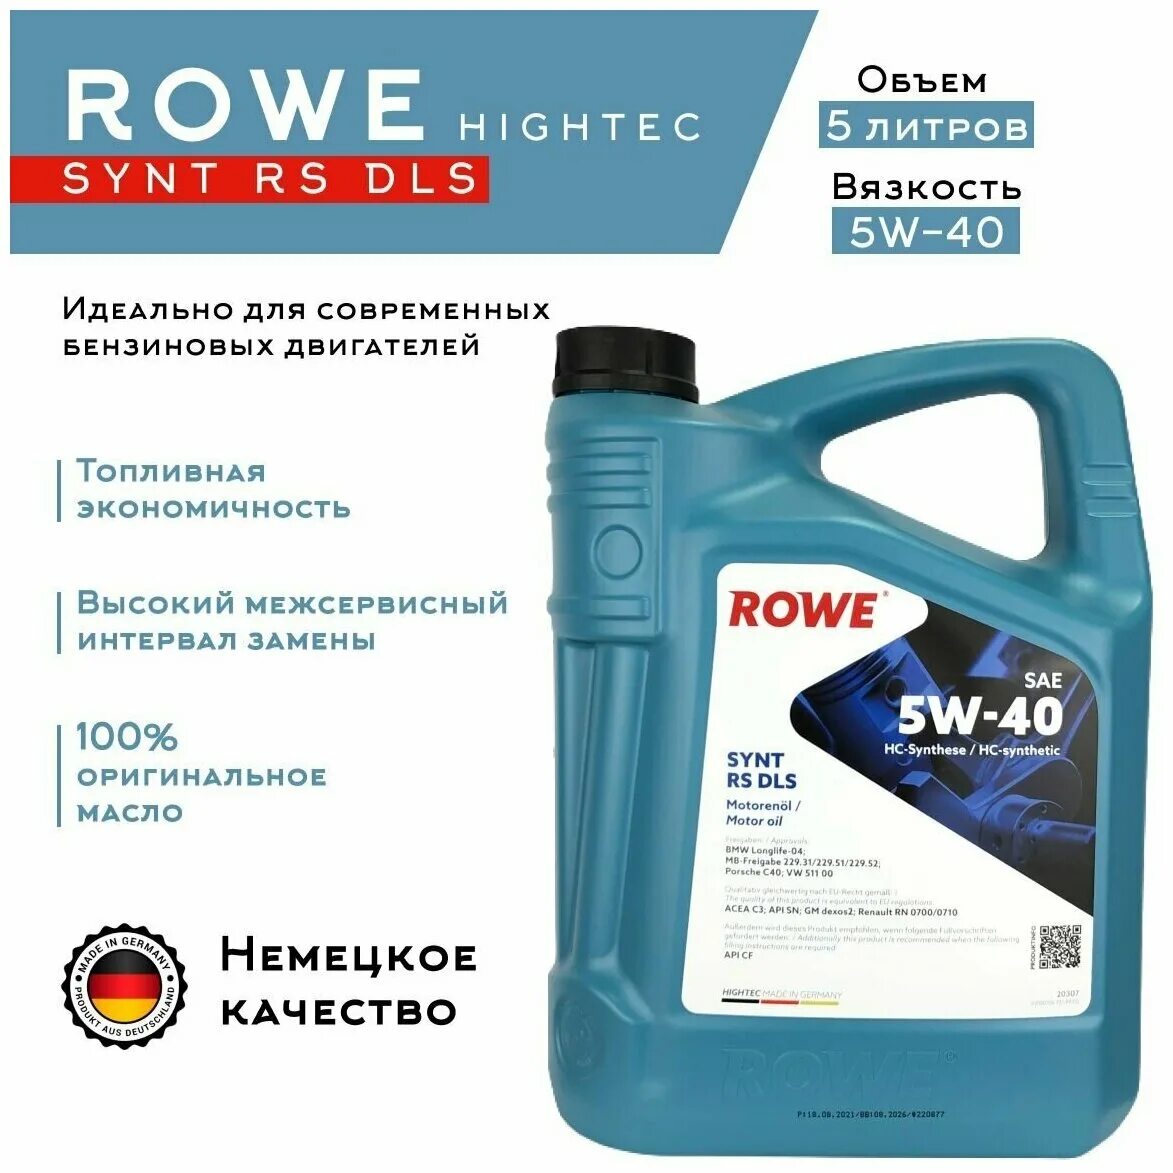 Масло rowe rs. Rowe Hightec Synt RS d1 5w30. Hightec Synt RSI SAE 5w-40. Rowe 5/40 Hightec Synt RSI. Моторное масло Rowe 5w30.